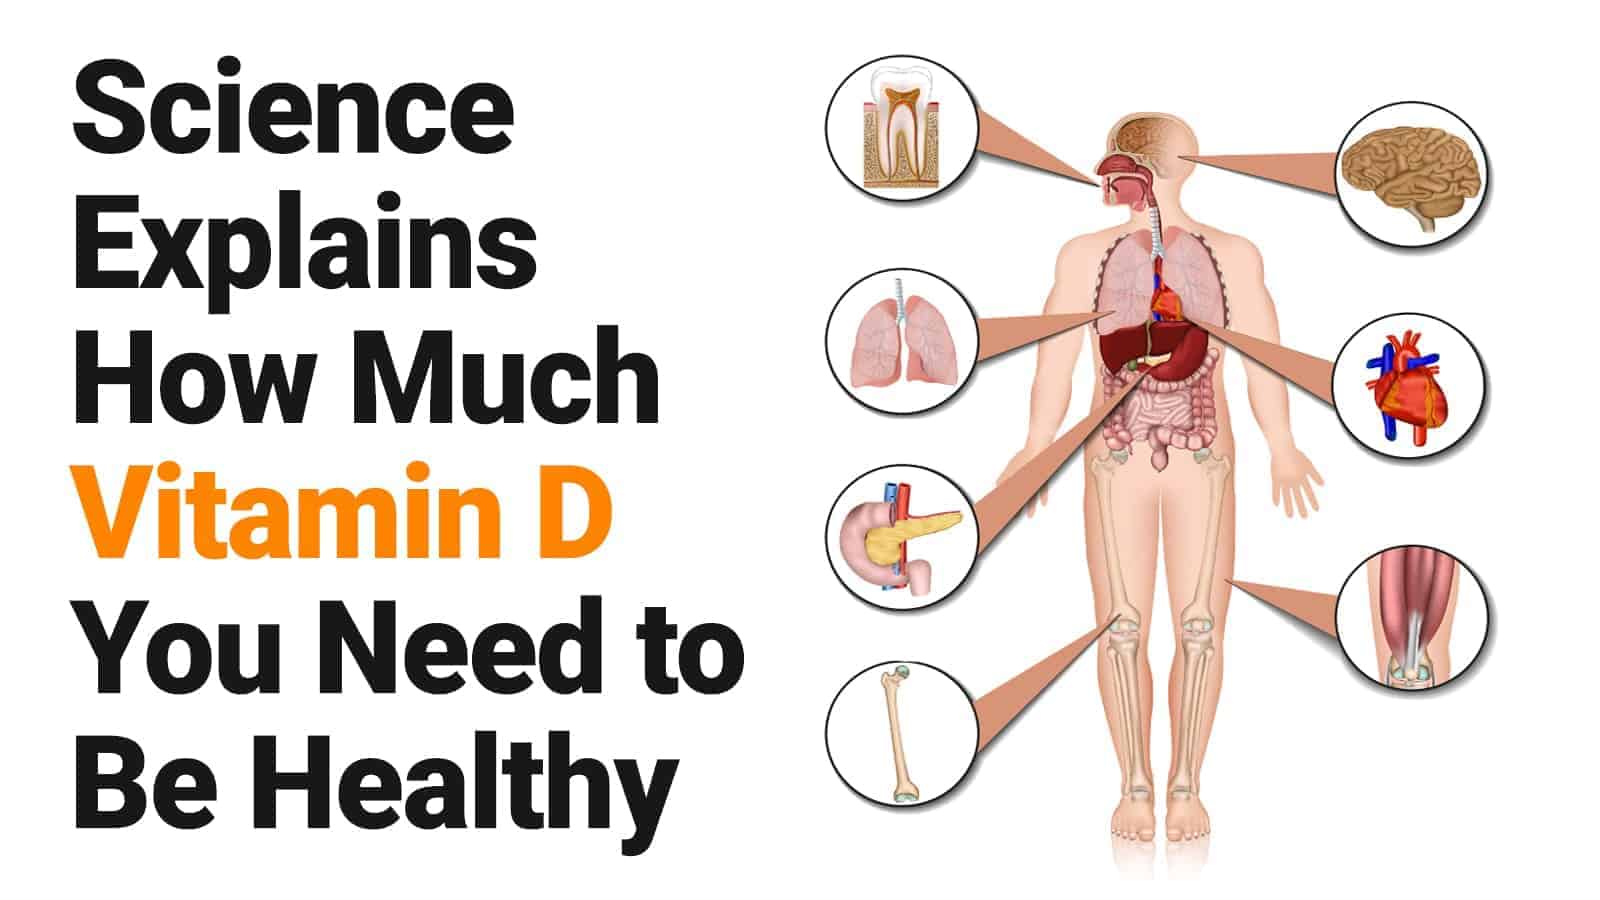 Science Explains How Much Vitamin D You Need to Be Healthy